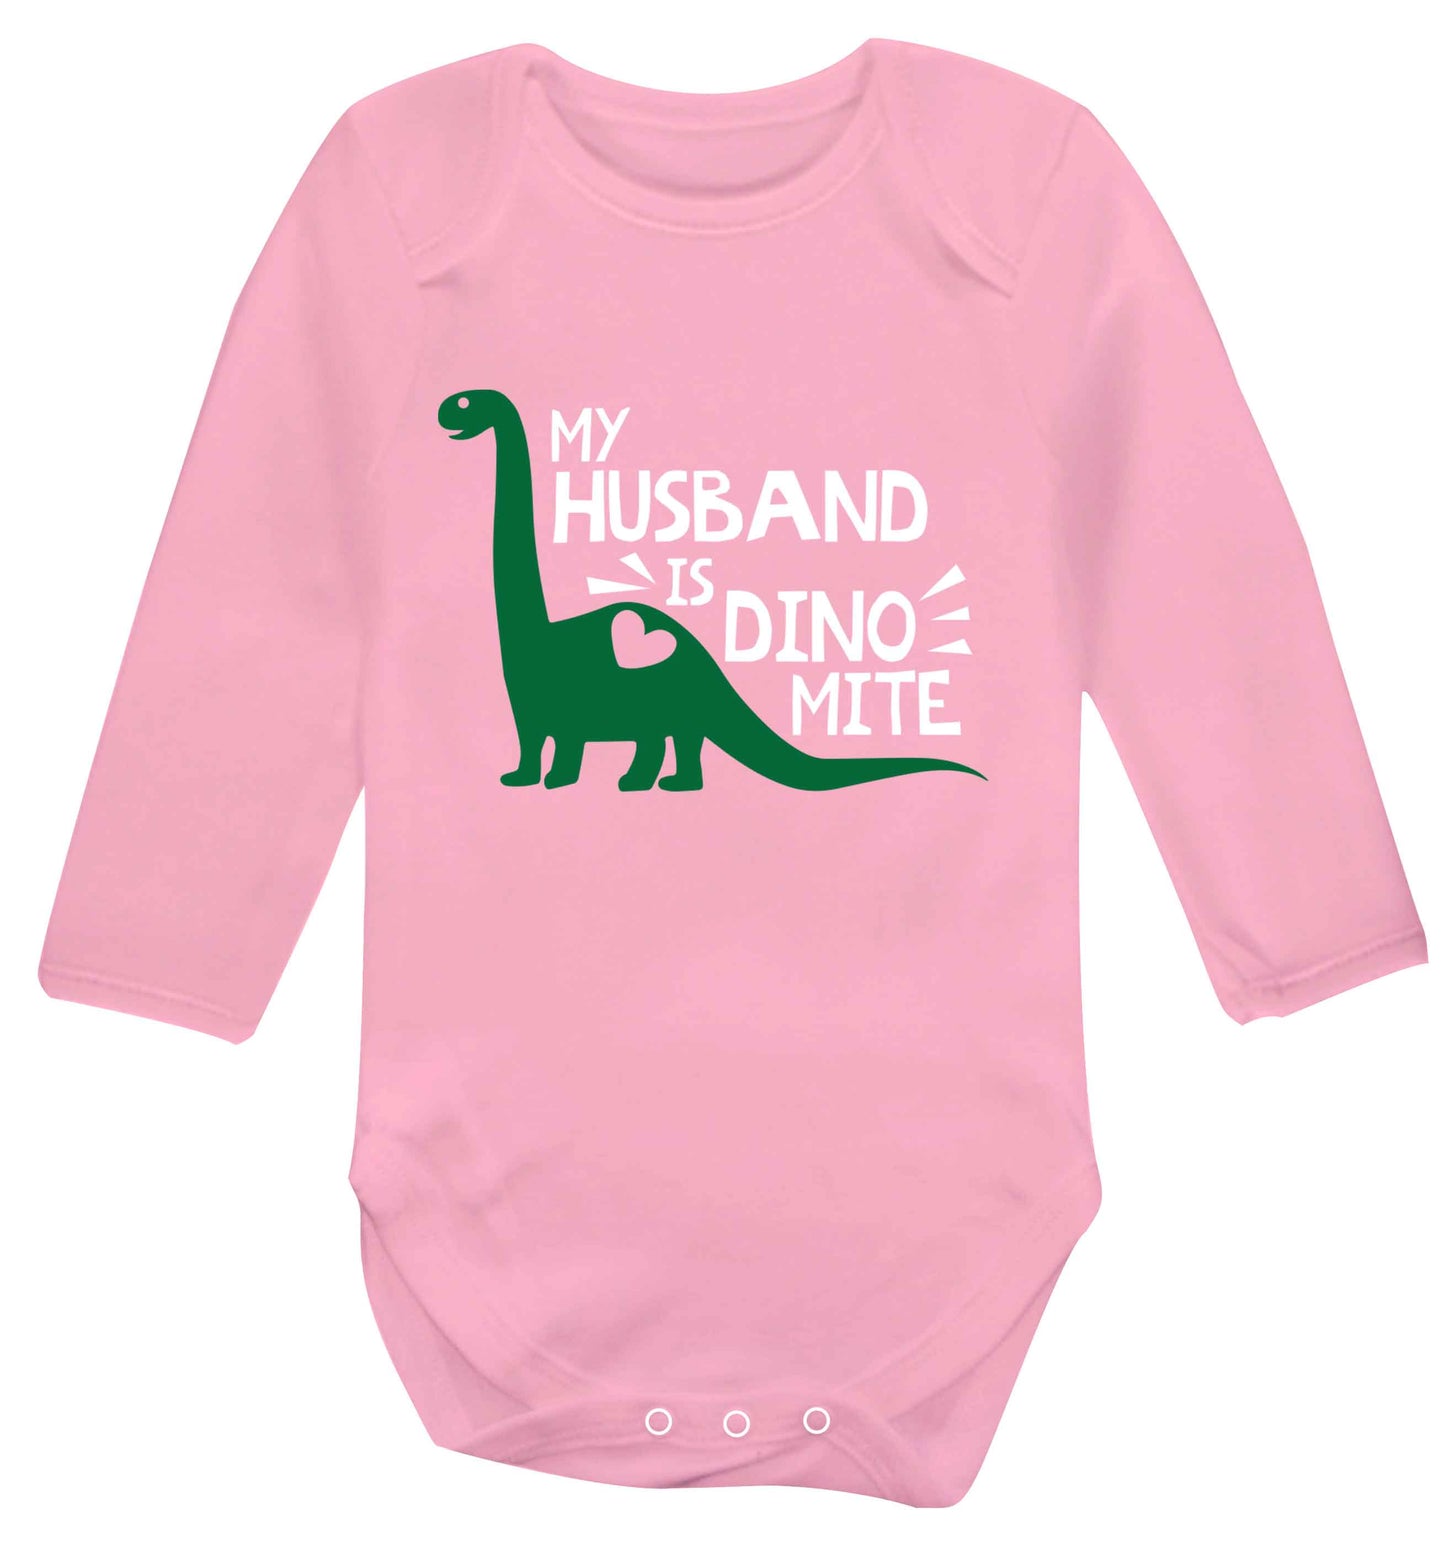 My husband is dinomite! Baby Vest long sleeved pale pink 6-12 months